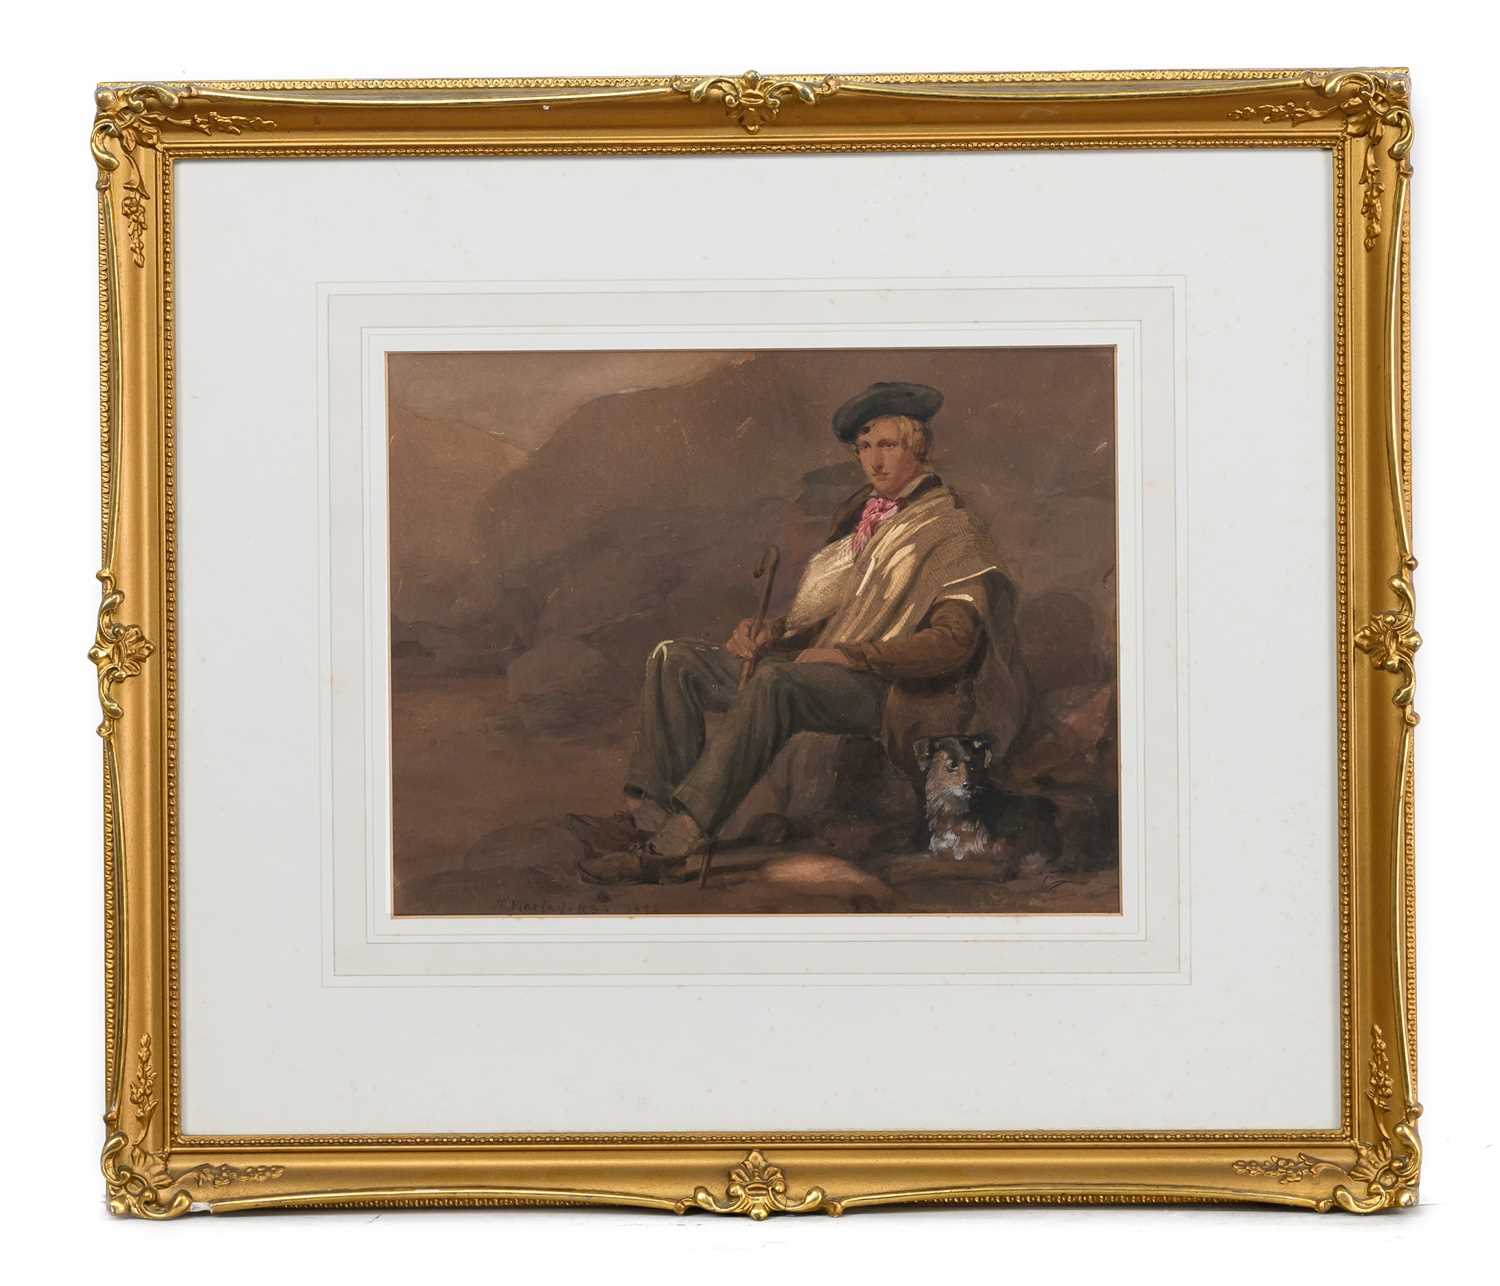 Lot 738 - KENNETH MACLEAY (SCOTTISH 1802 - 1872)